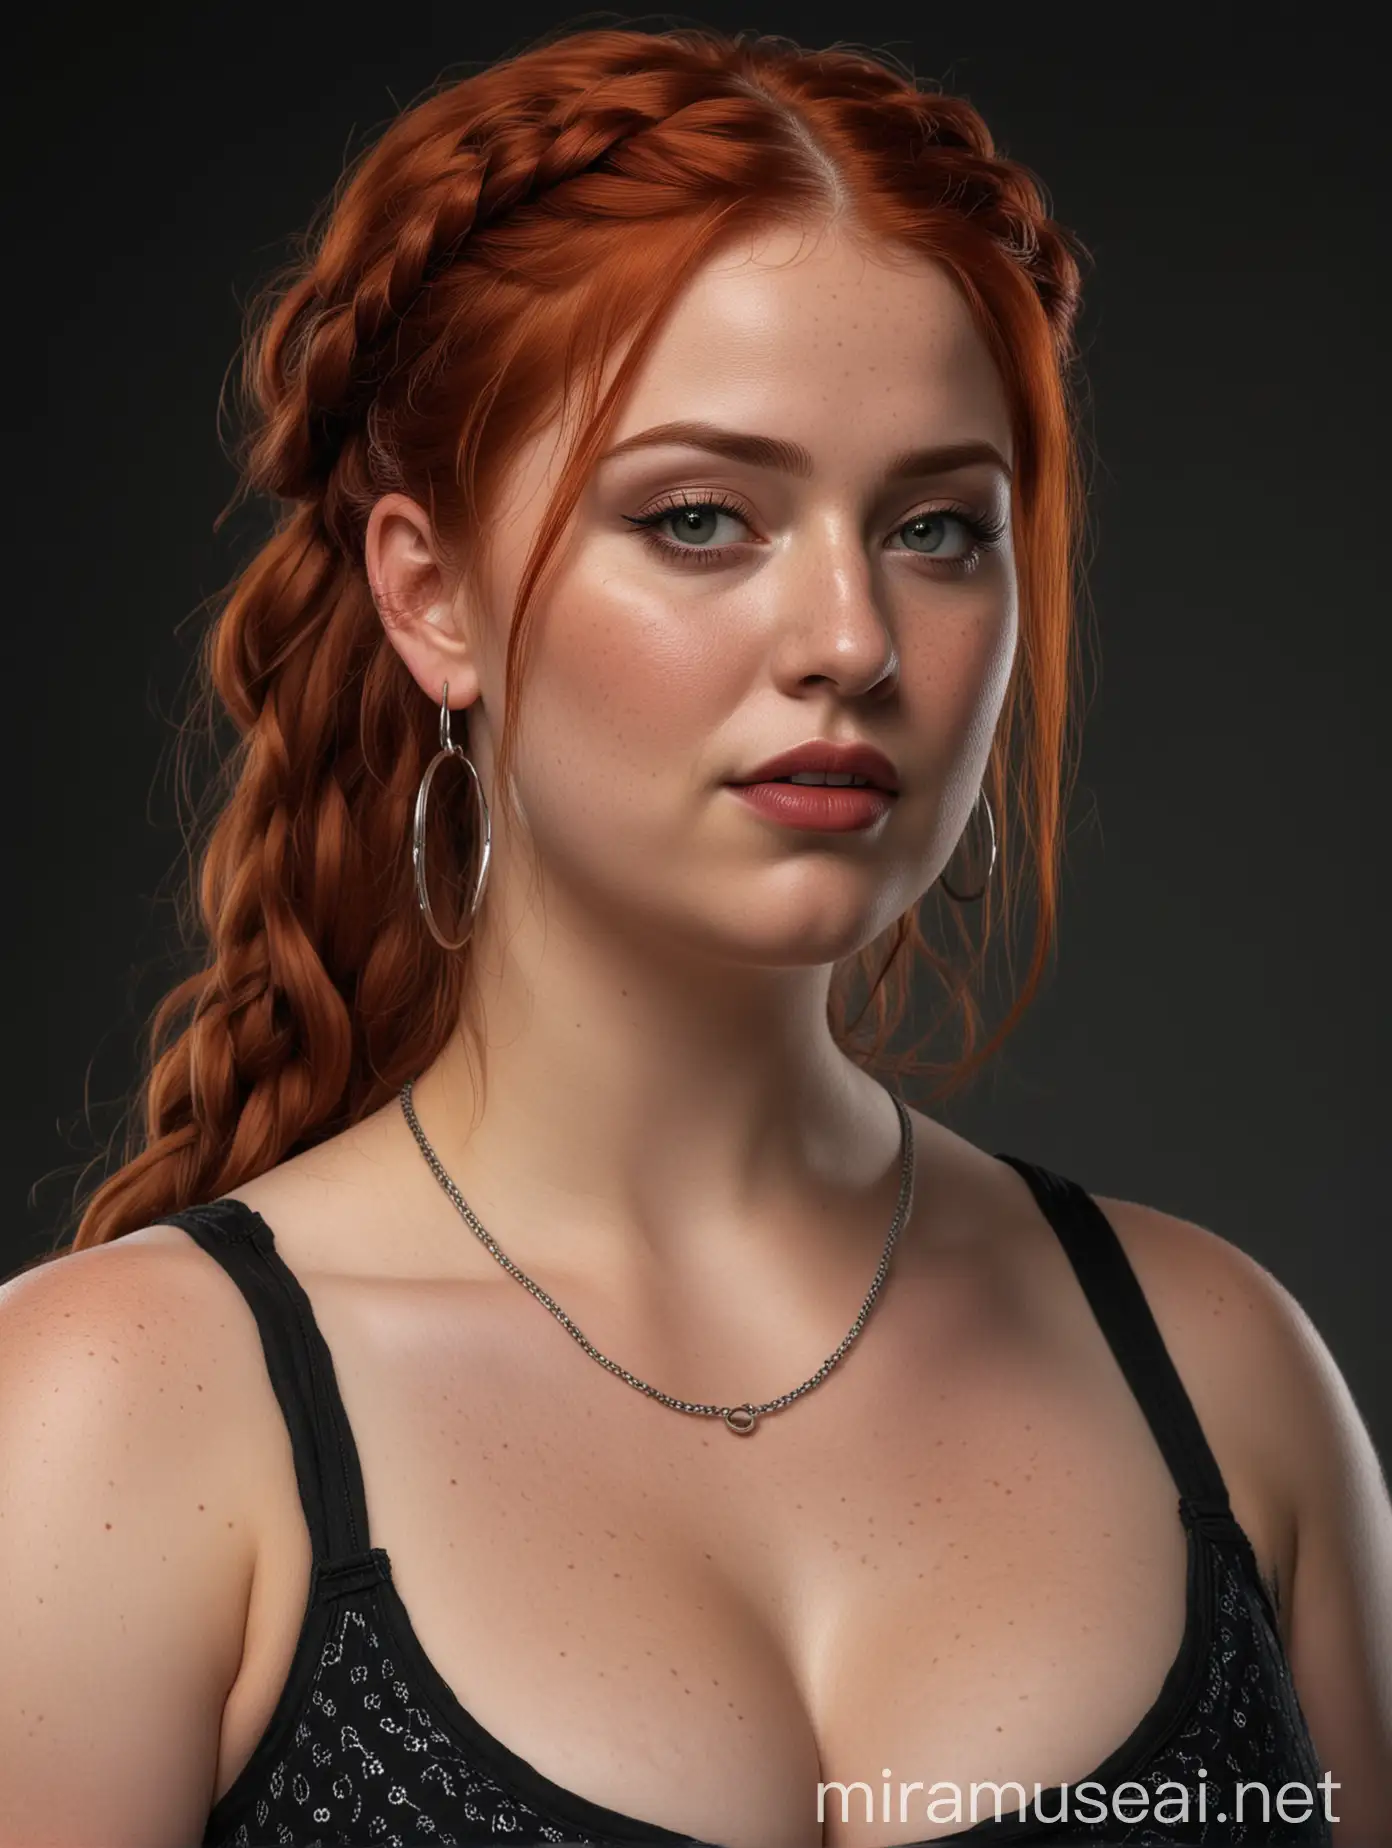 RenaissanceStyle Portrait of a Chubby Woman with Red Braids and Dark Lipstick